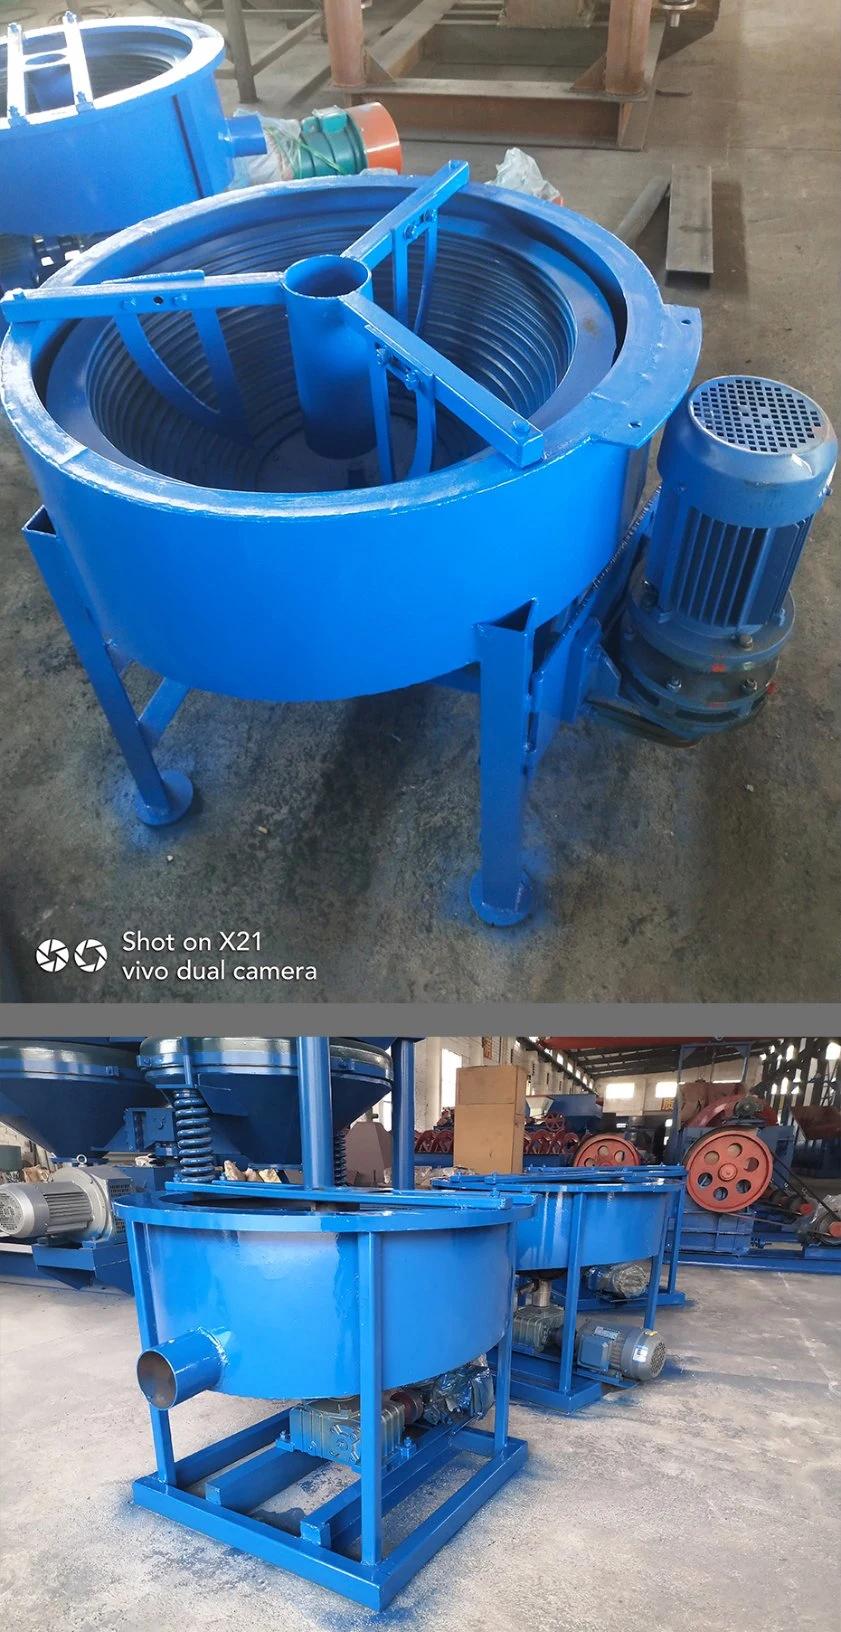 1-3 Production Capacity Gravity Centrifugal Gold Concentrator, Centrifuge Separator for Gold Ore